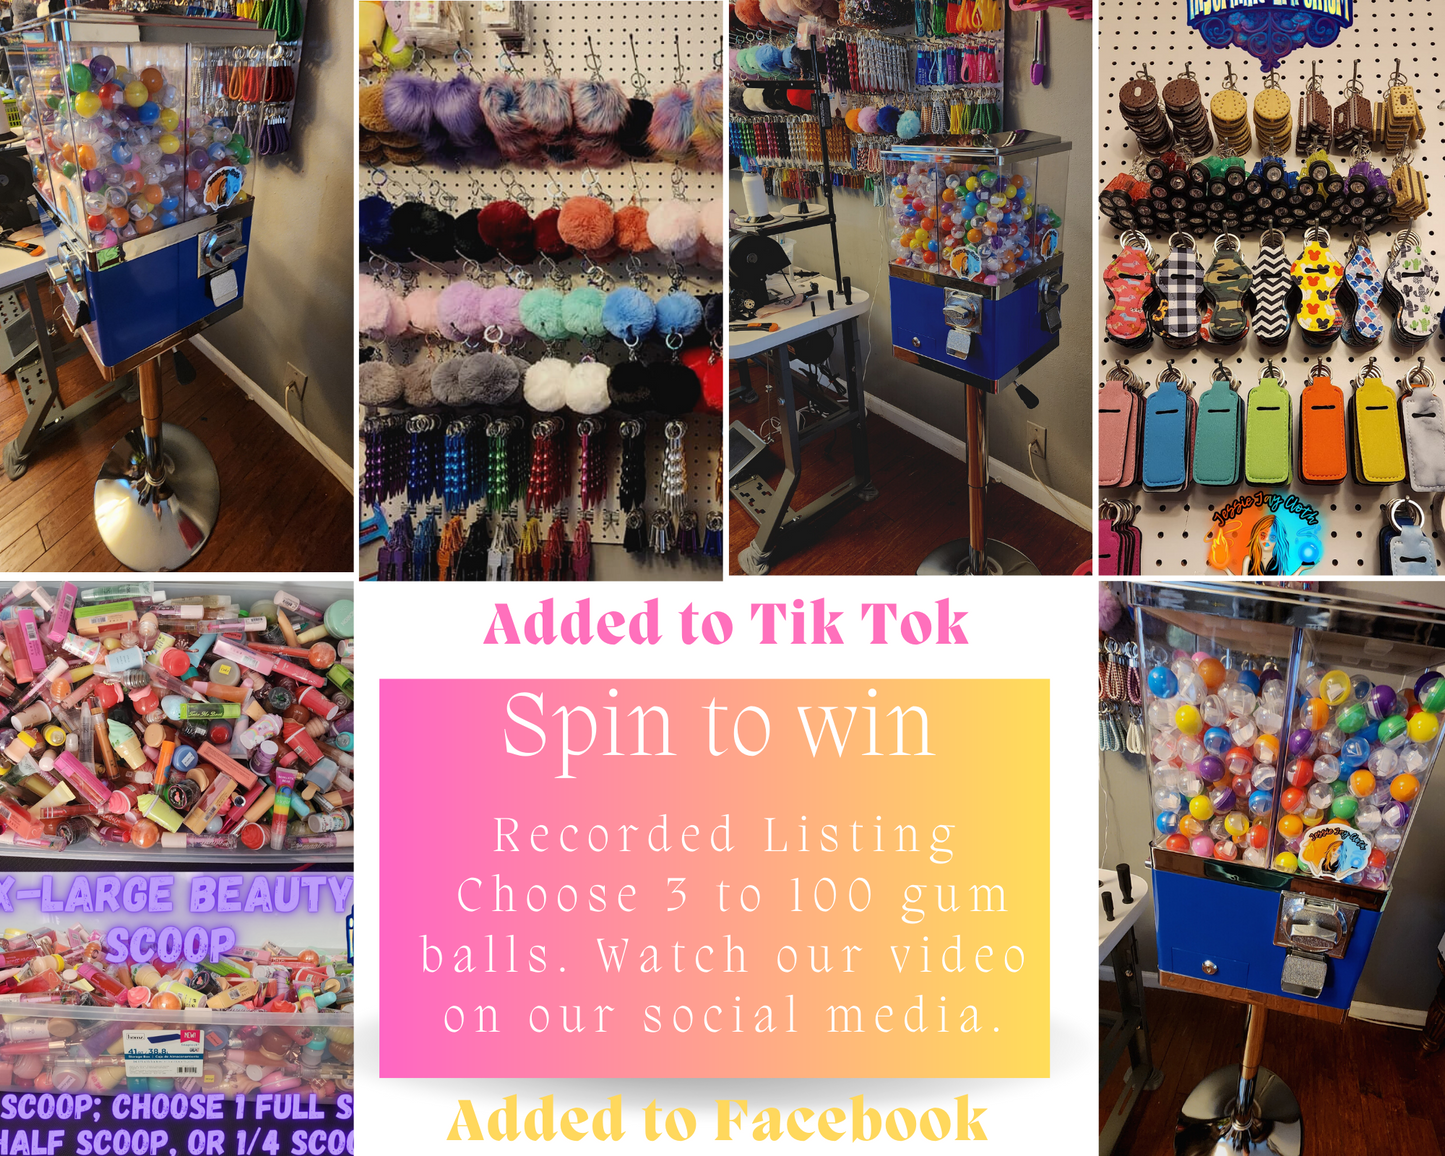 Recorded Spin to win prizes | Mystery Gifts, Beauty Bin |Slime, Bath bomb, Shower steamer | Add on | Surprise gum ball prizes!